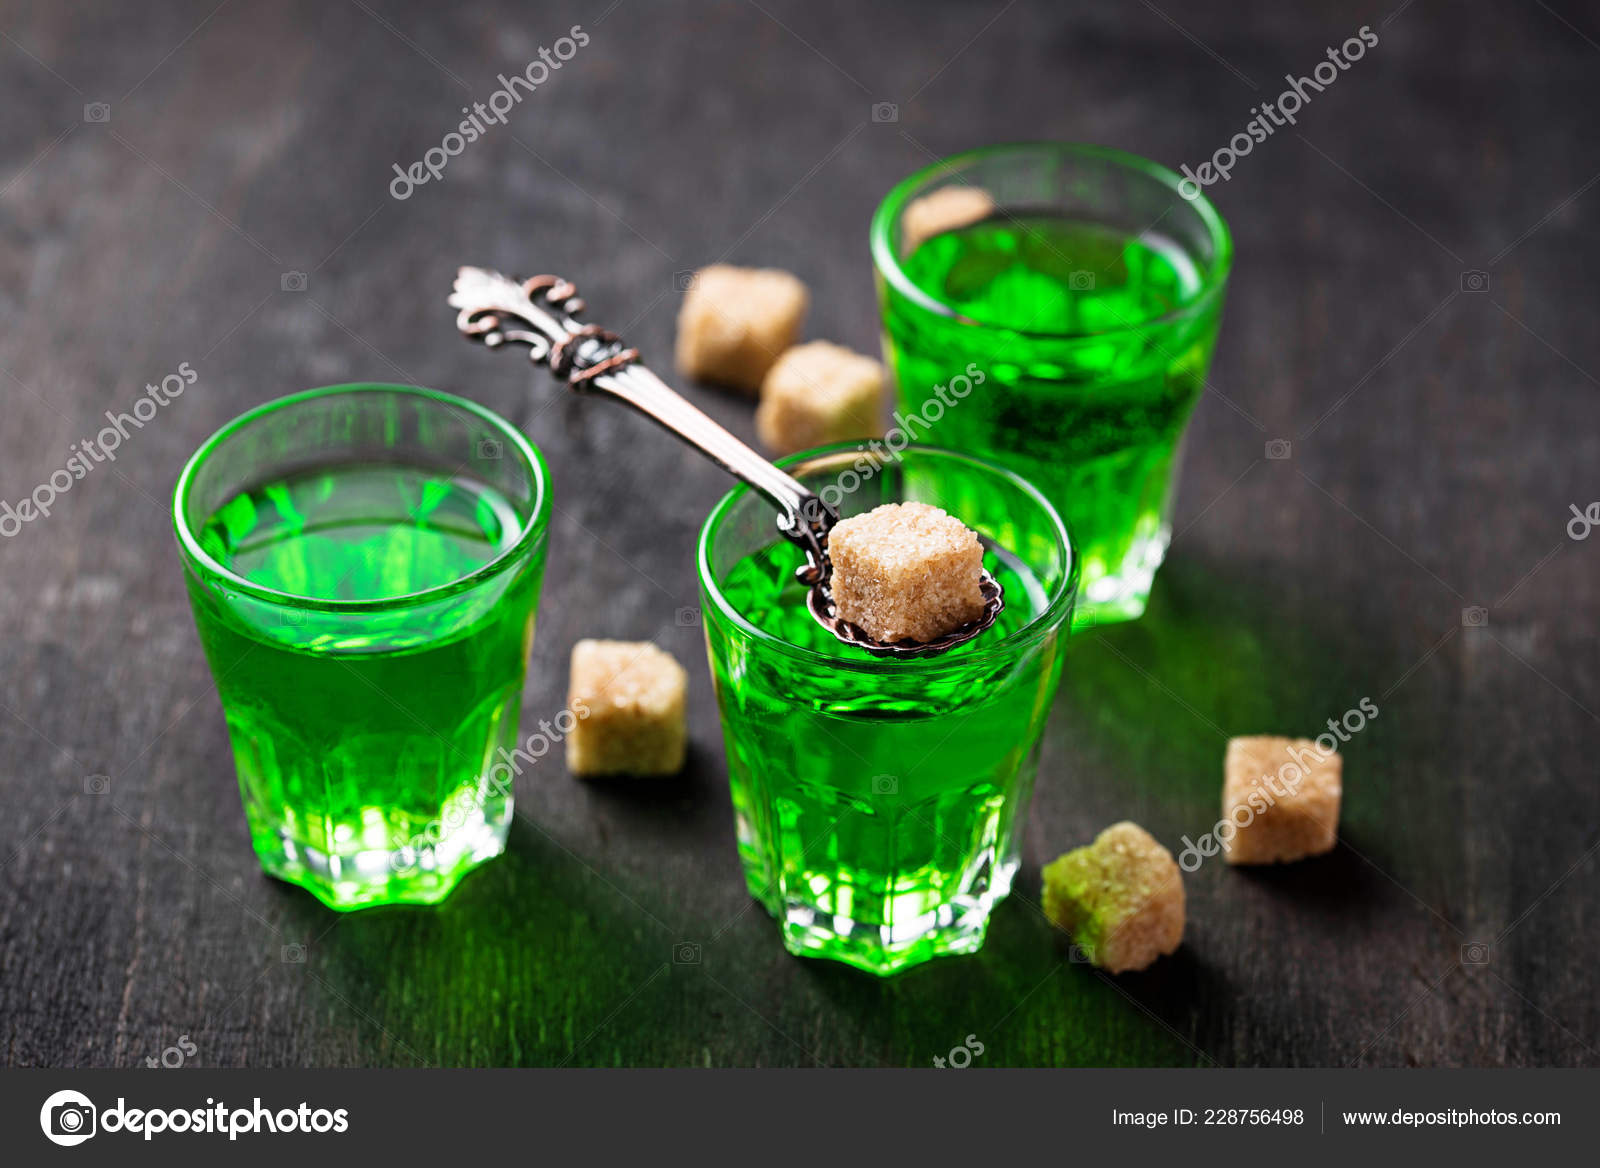 Glass with Green Absinthe. a Small Shot Glass with Green Liquid Stock Image  - Image of glass, drink: 124266747